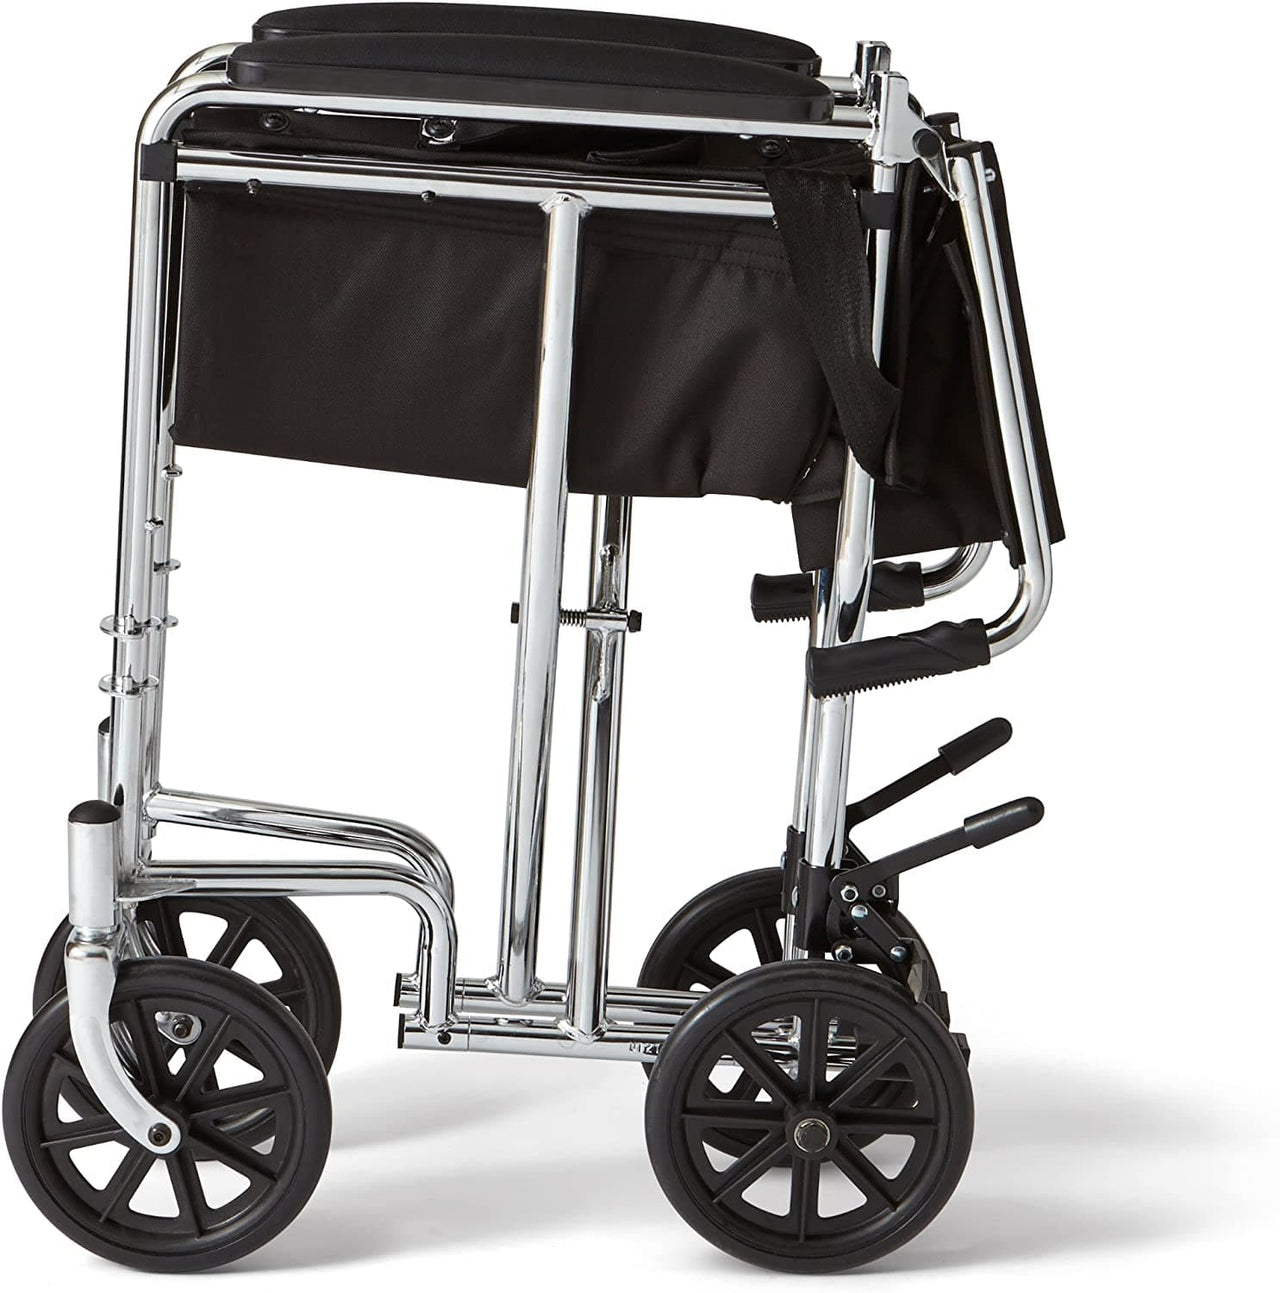 Medline Carbon Steel Transport Chair with Swing-Away Footrests - Senior.com Transport Chairs